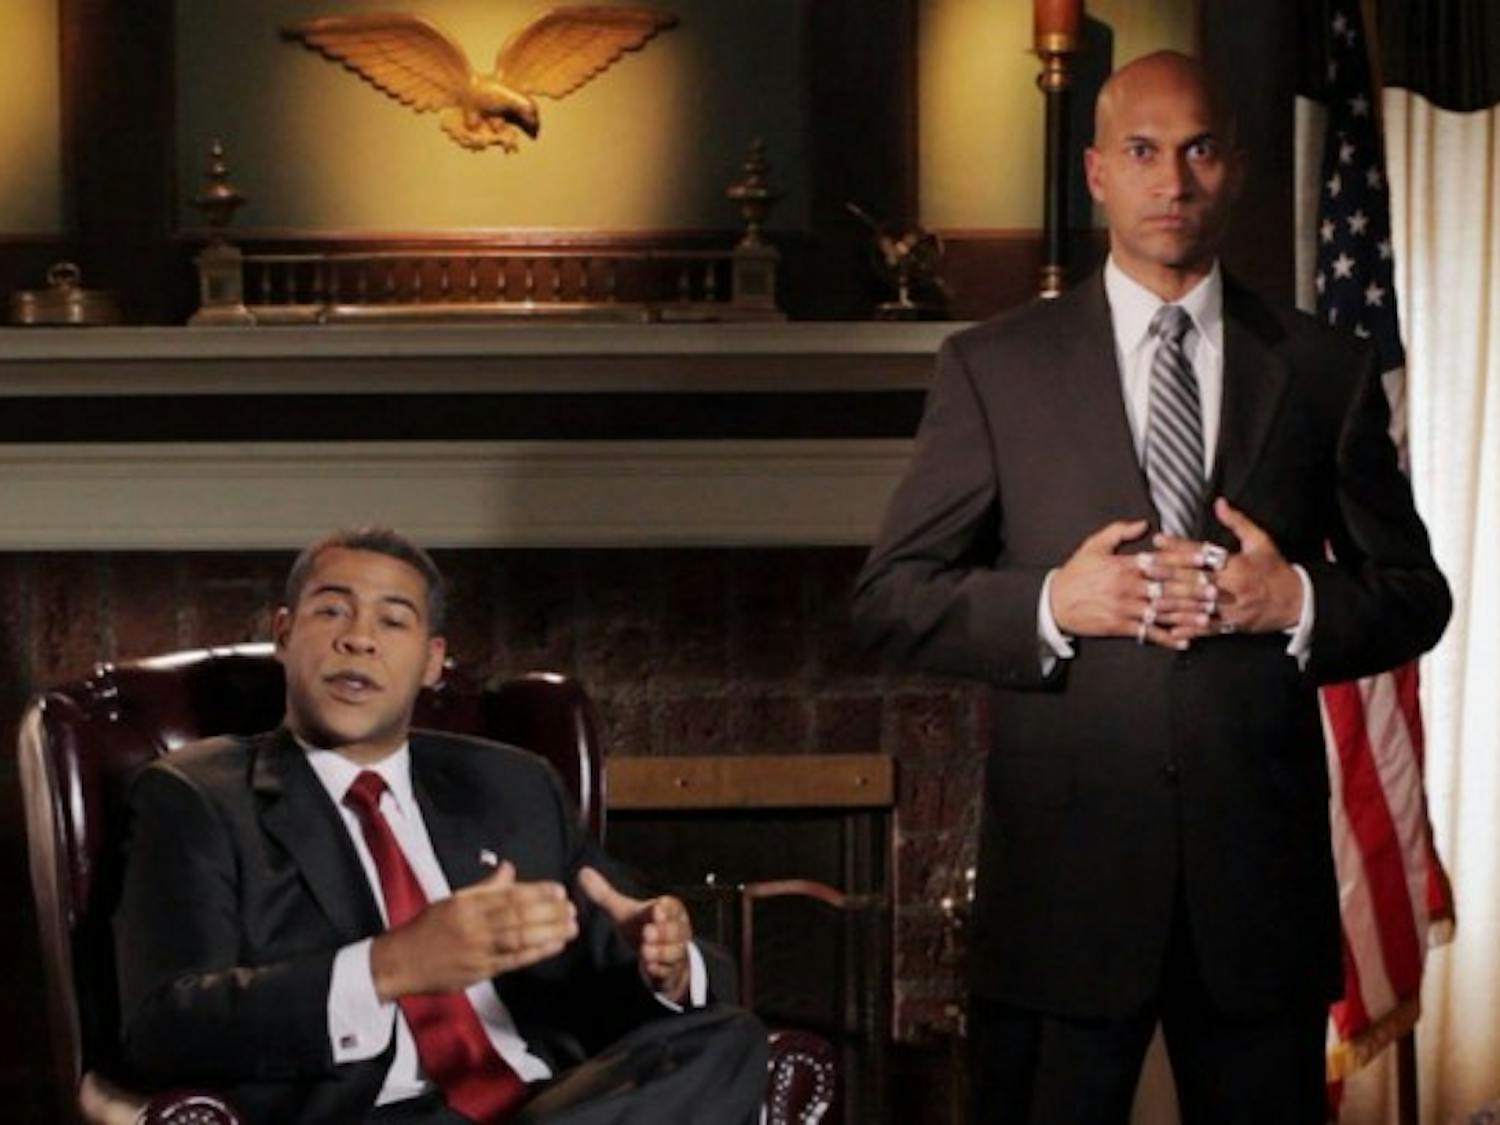 Would you want to parody the president? "Key &amp; Peele" is a new sketch comedy show that fearlessly examines today's society.